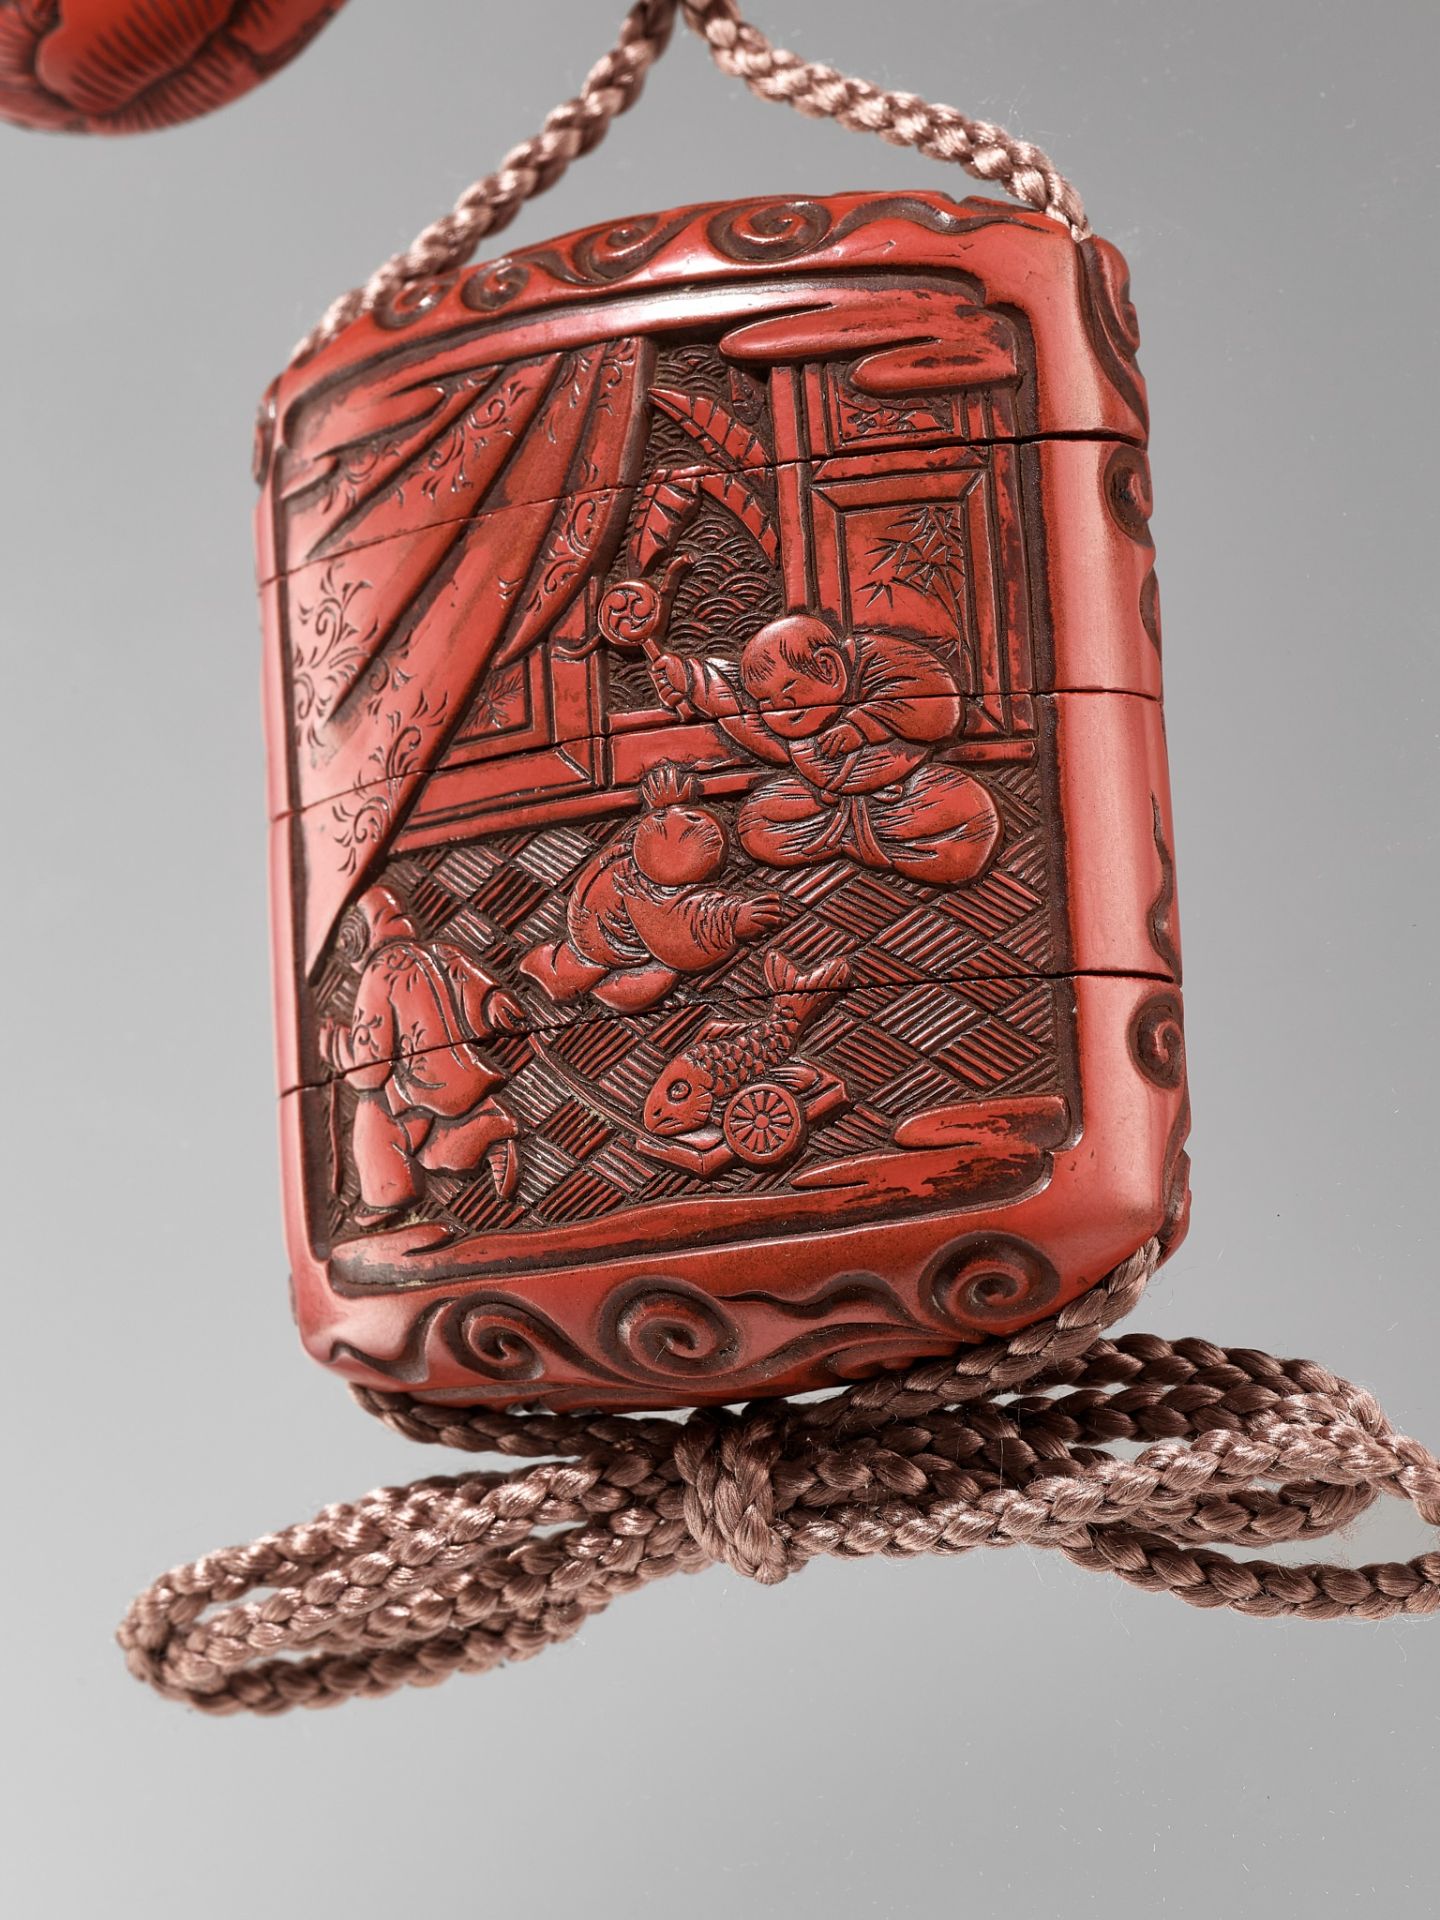 A FINE TSUISHU THREE-CASE LACQUER INRO WITH KARAKO AT PLAY, WITH EN SUITE NETSUKE AND OJIME - Image 2 of 9